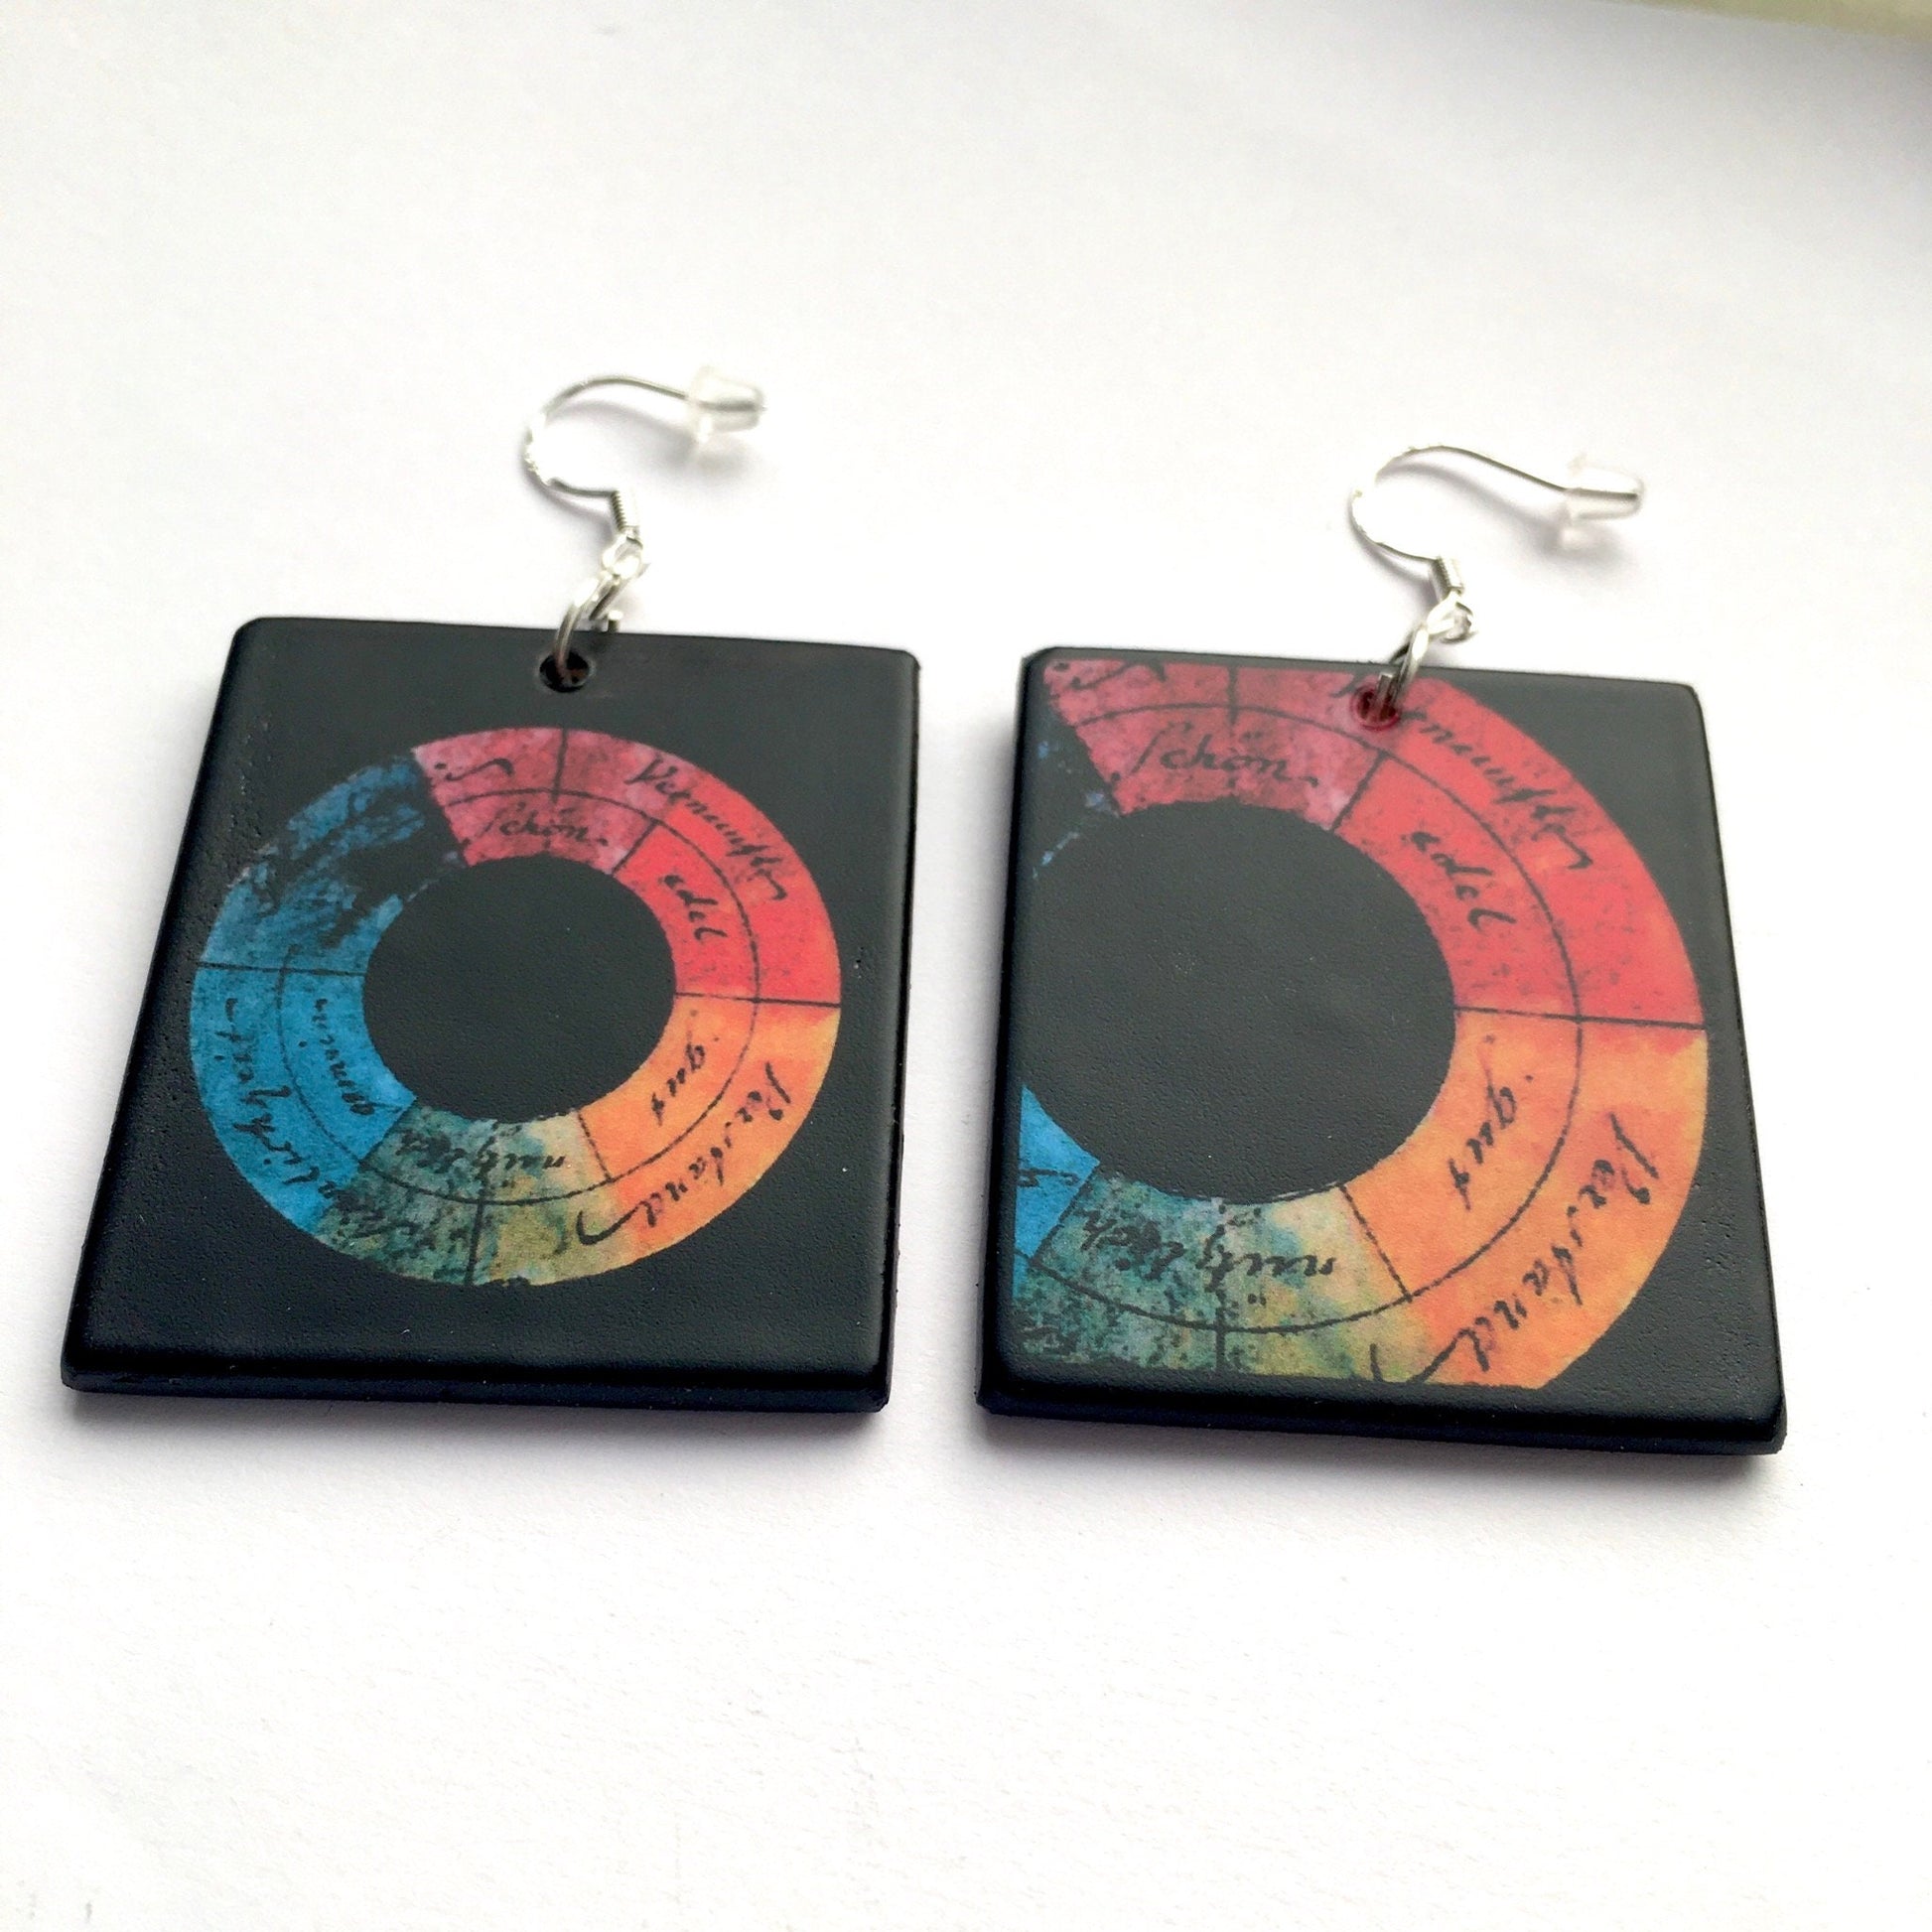 Color wheel designed by Goethe in 1809 inspired Obljewellery for these mismatched earrings.